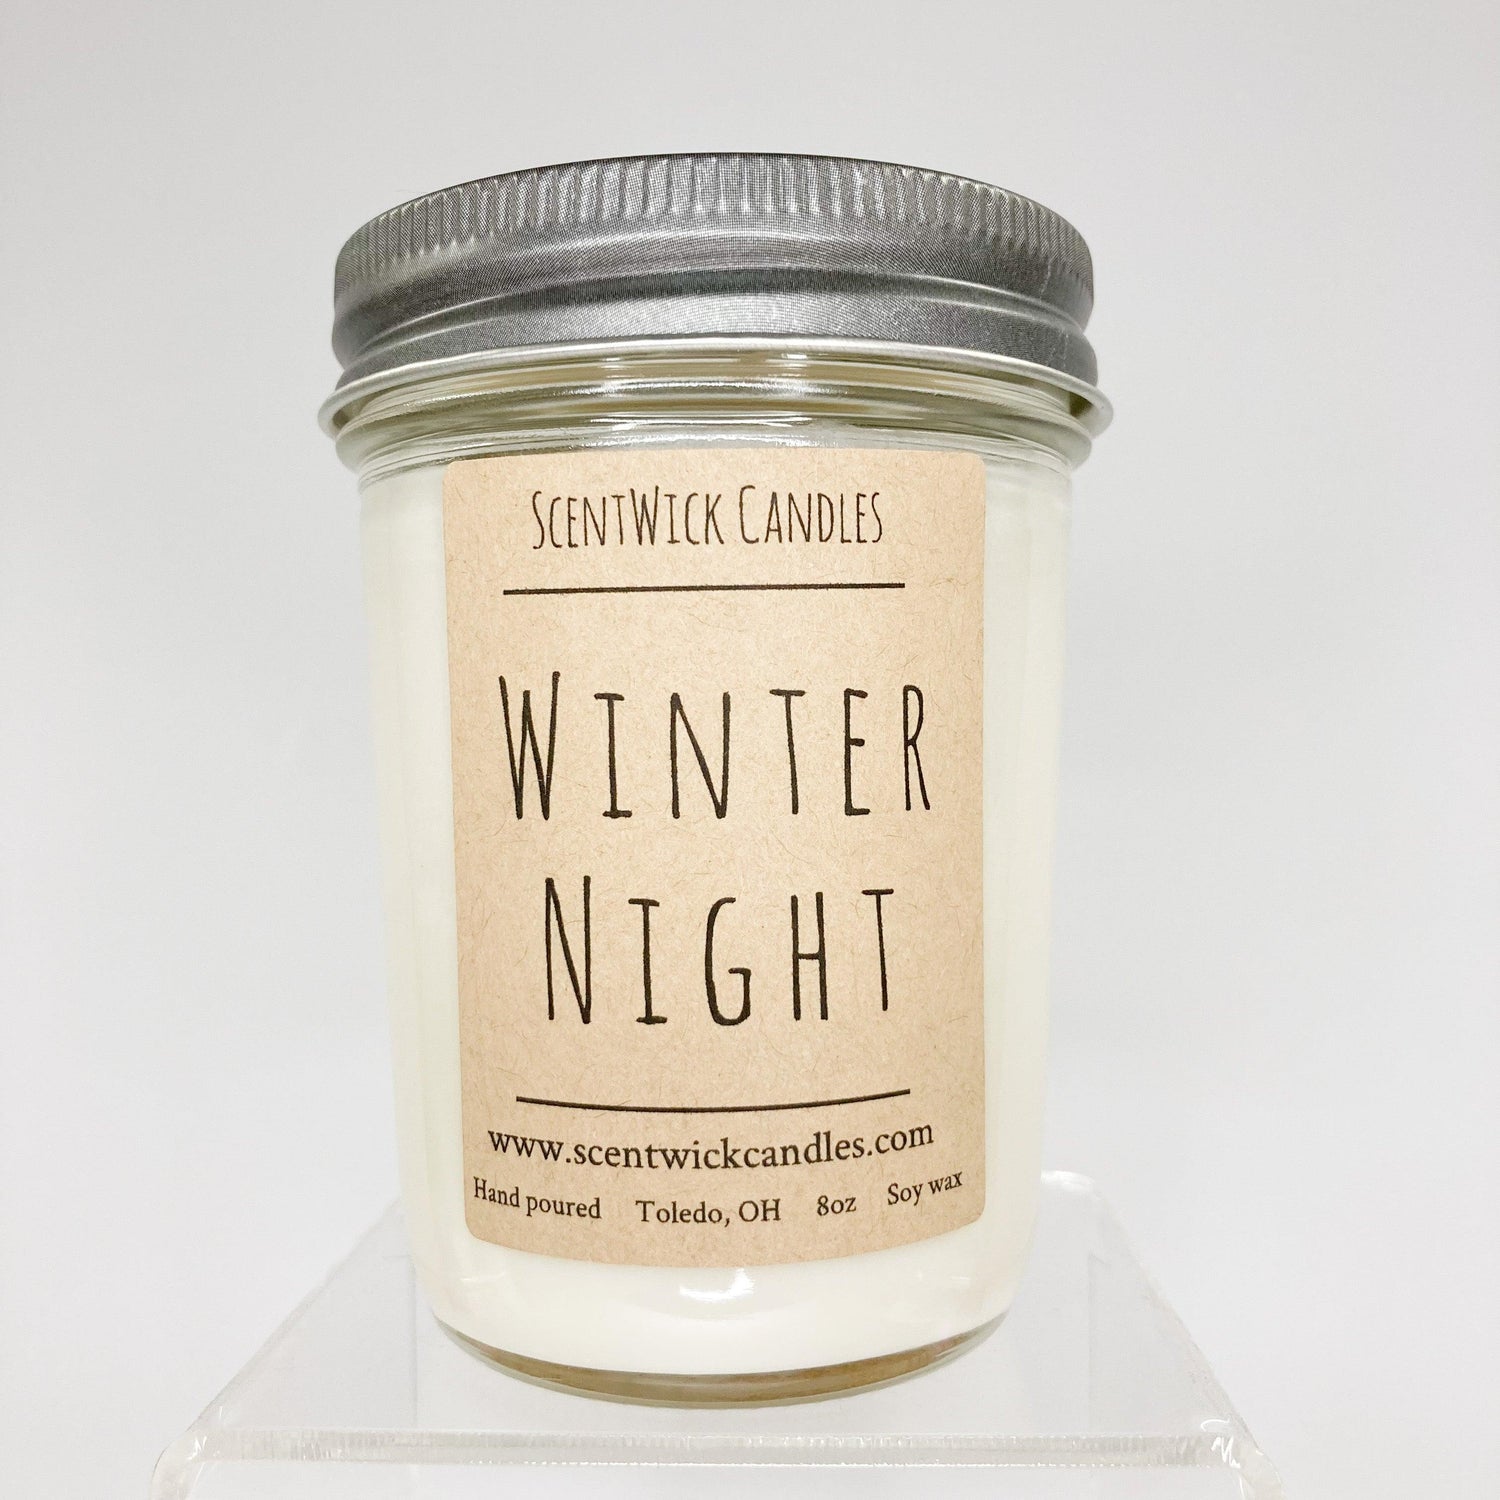 Winter Night - ScentWick Candles